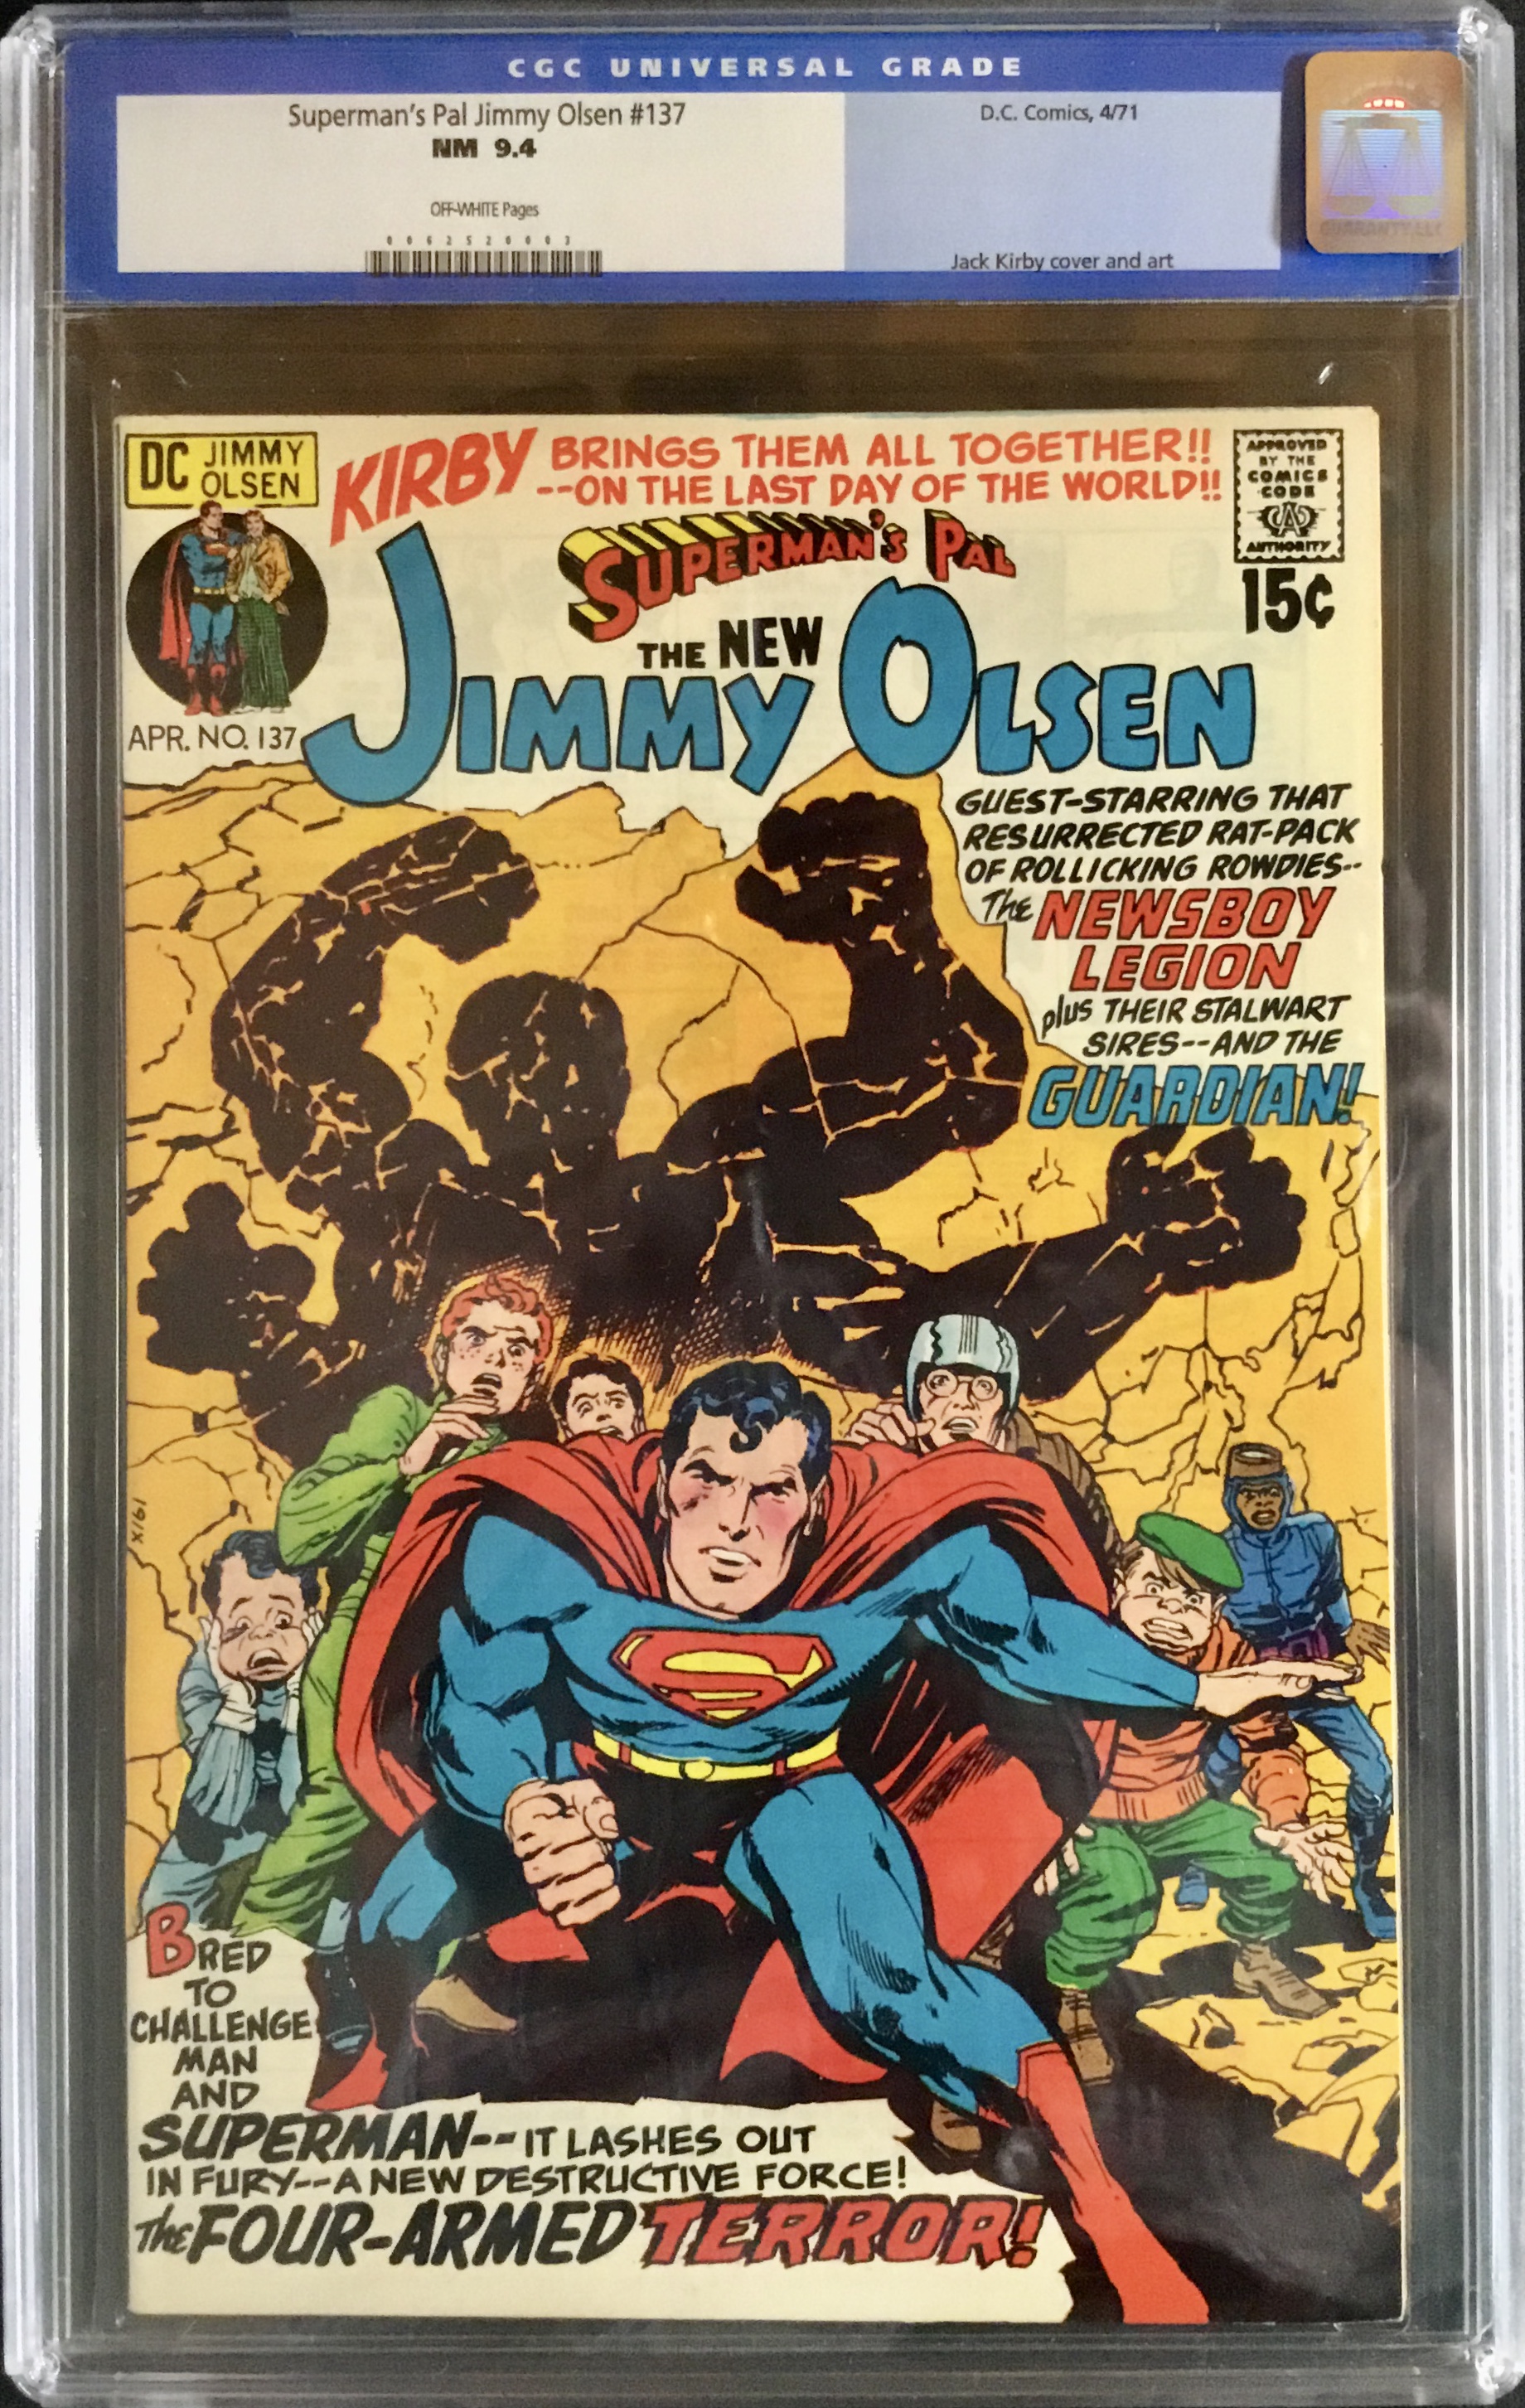 JIMMY OLSEN No. 137 (April 1971) - CGC Graded 9.4 (NM) by KIRBY